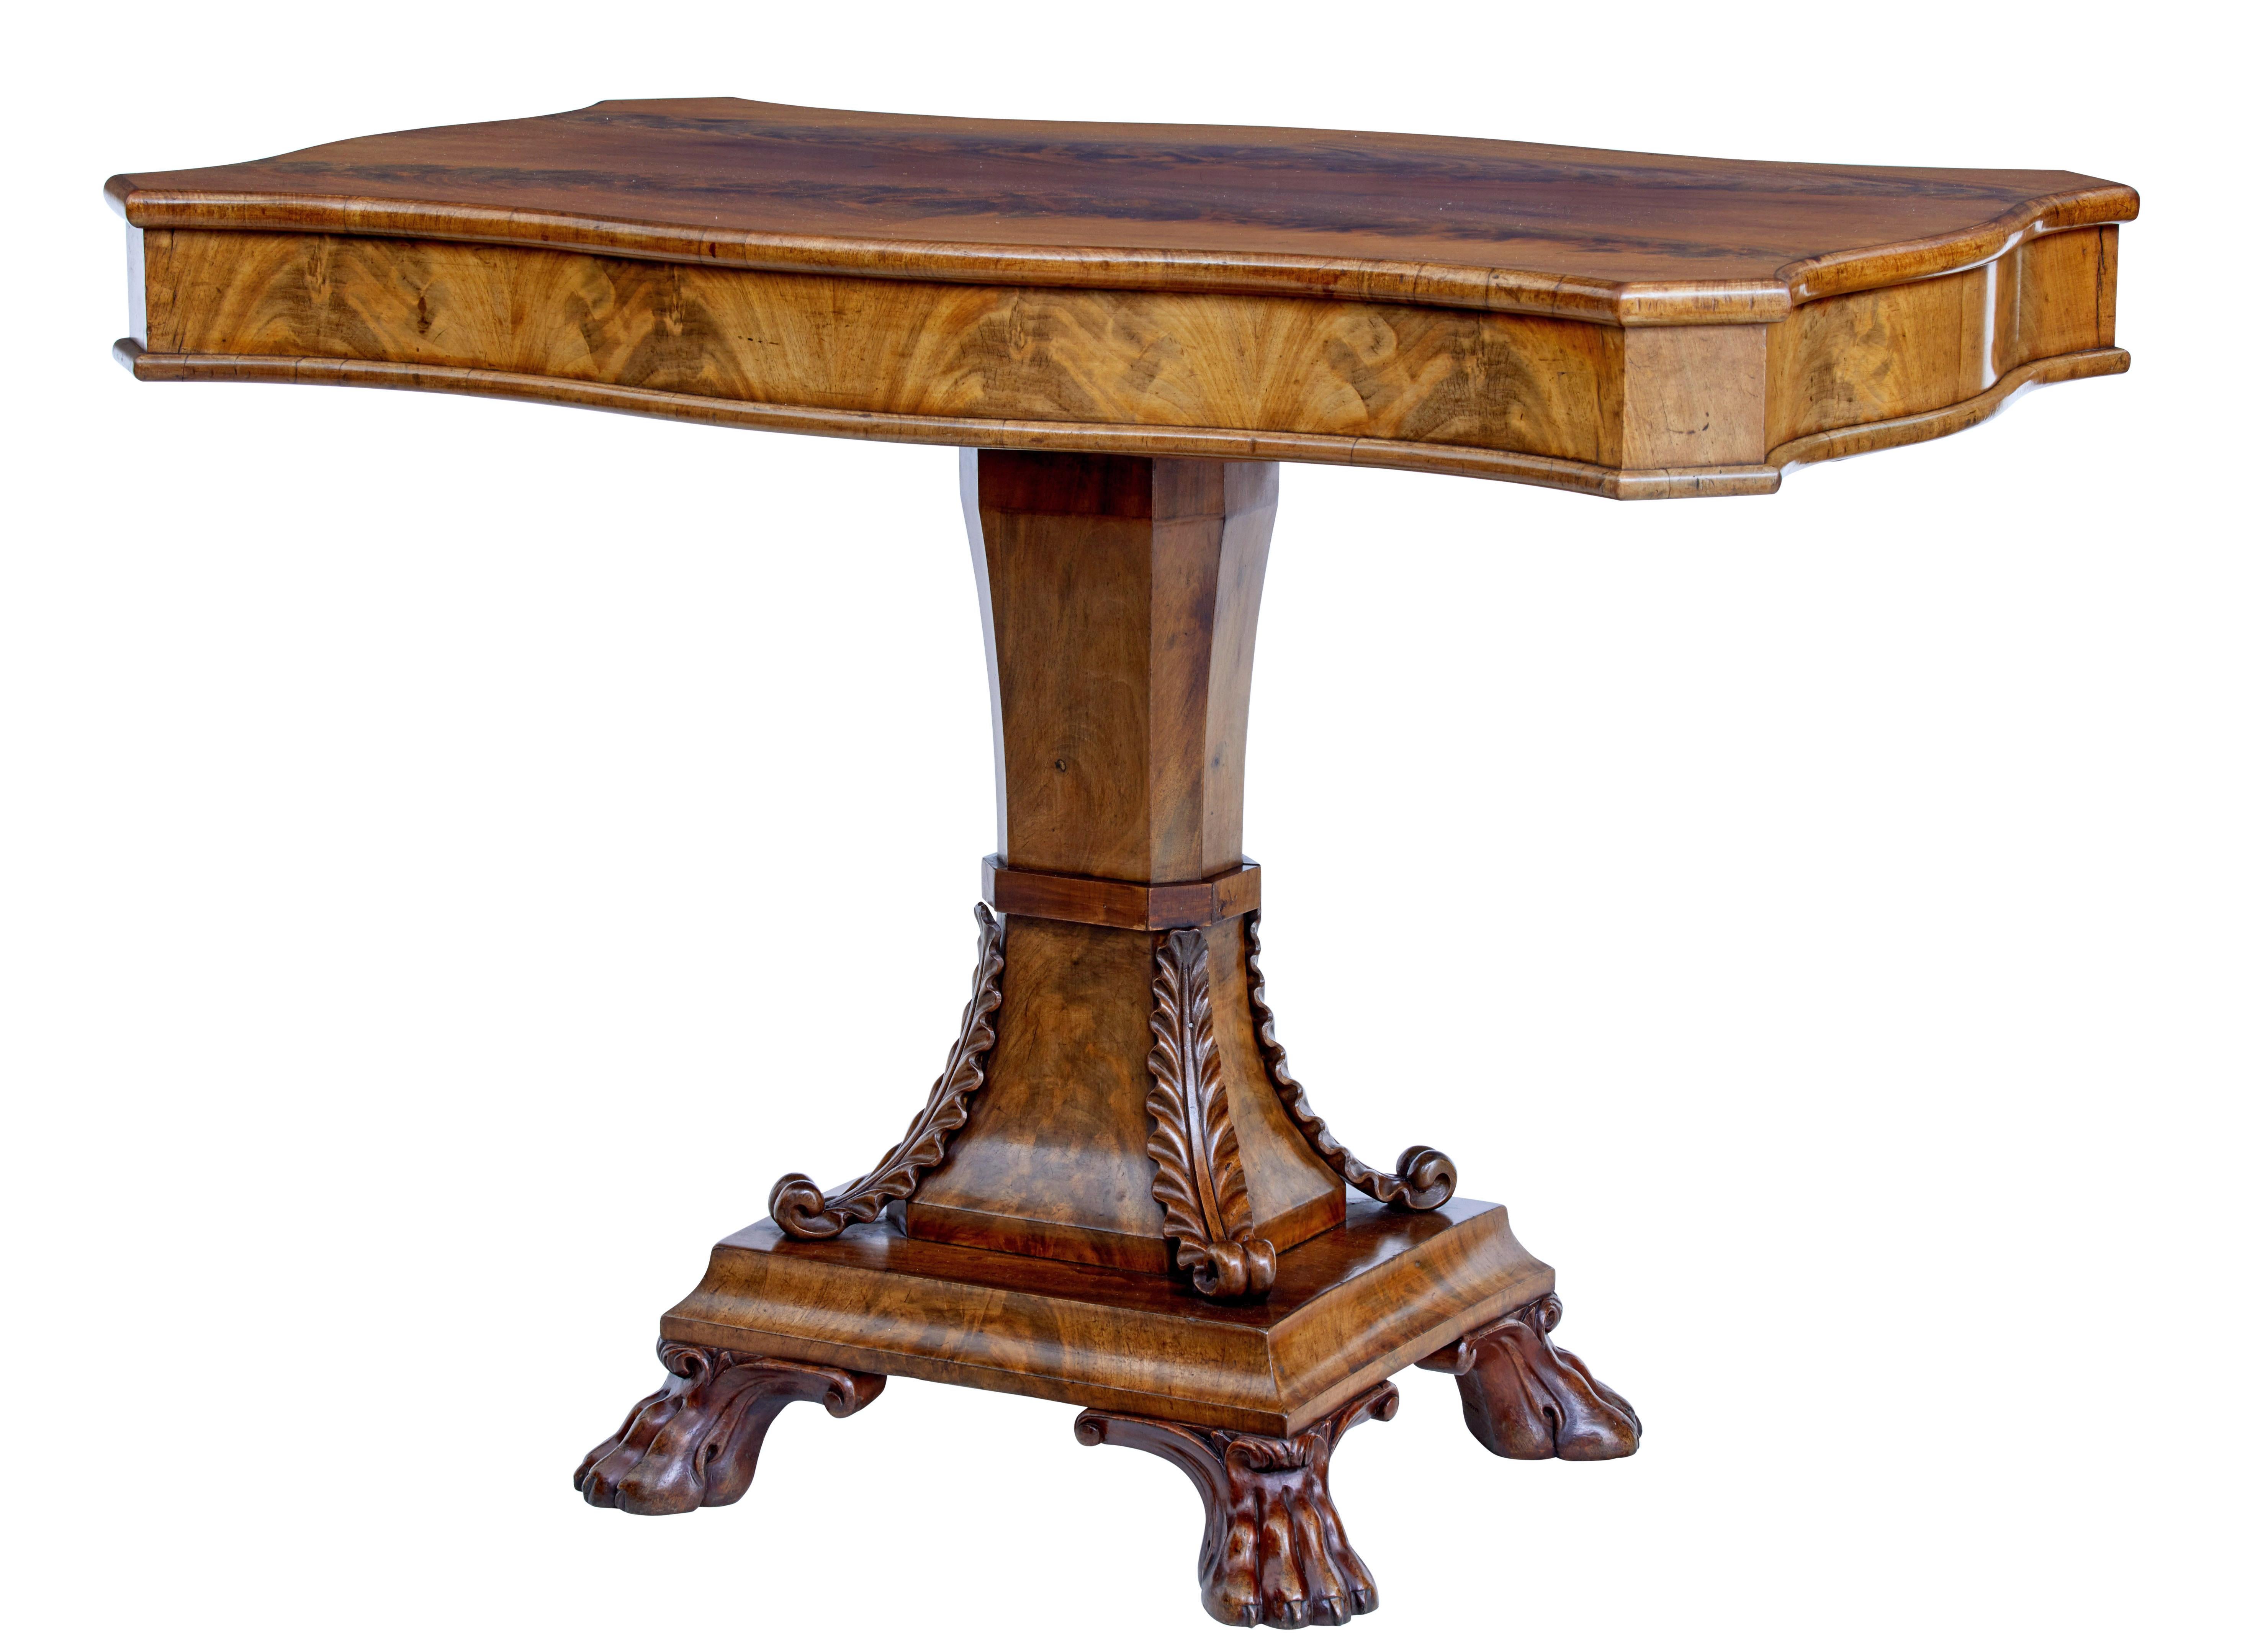 William IV Mid-19th Century Carved Swedish Flame Mahogany Centre Table